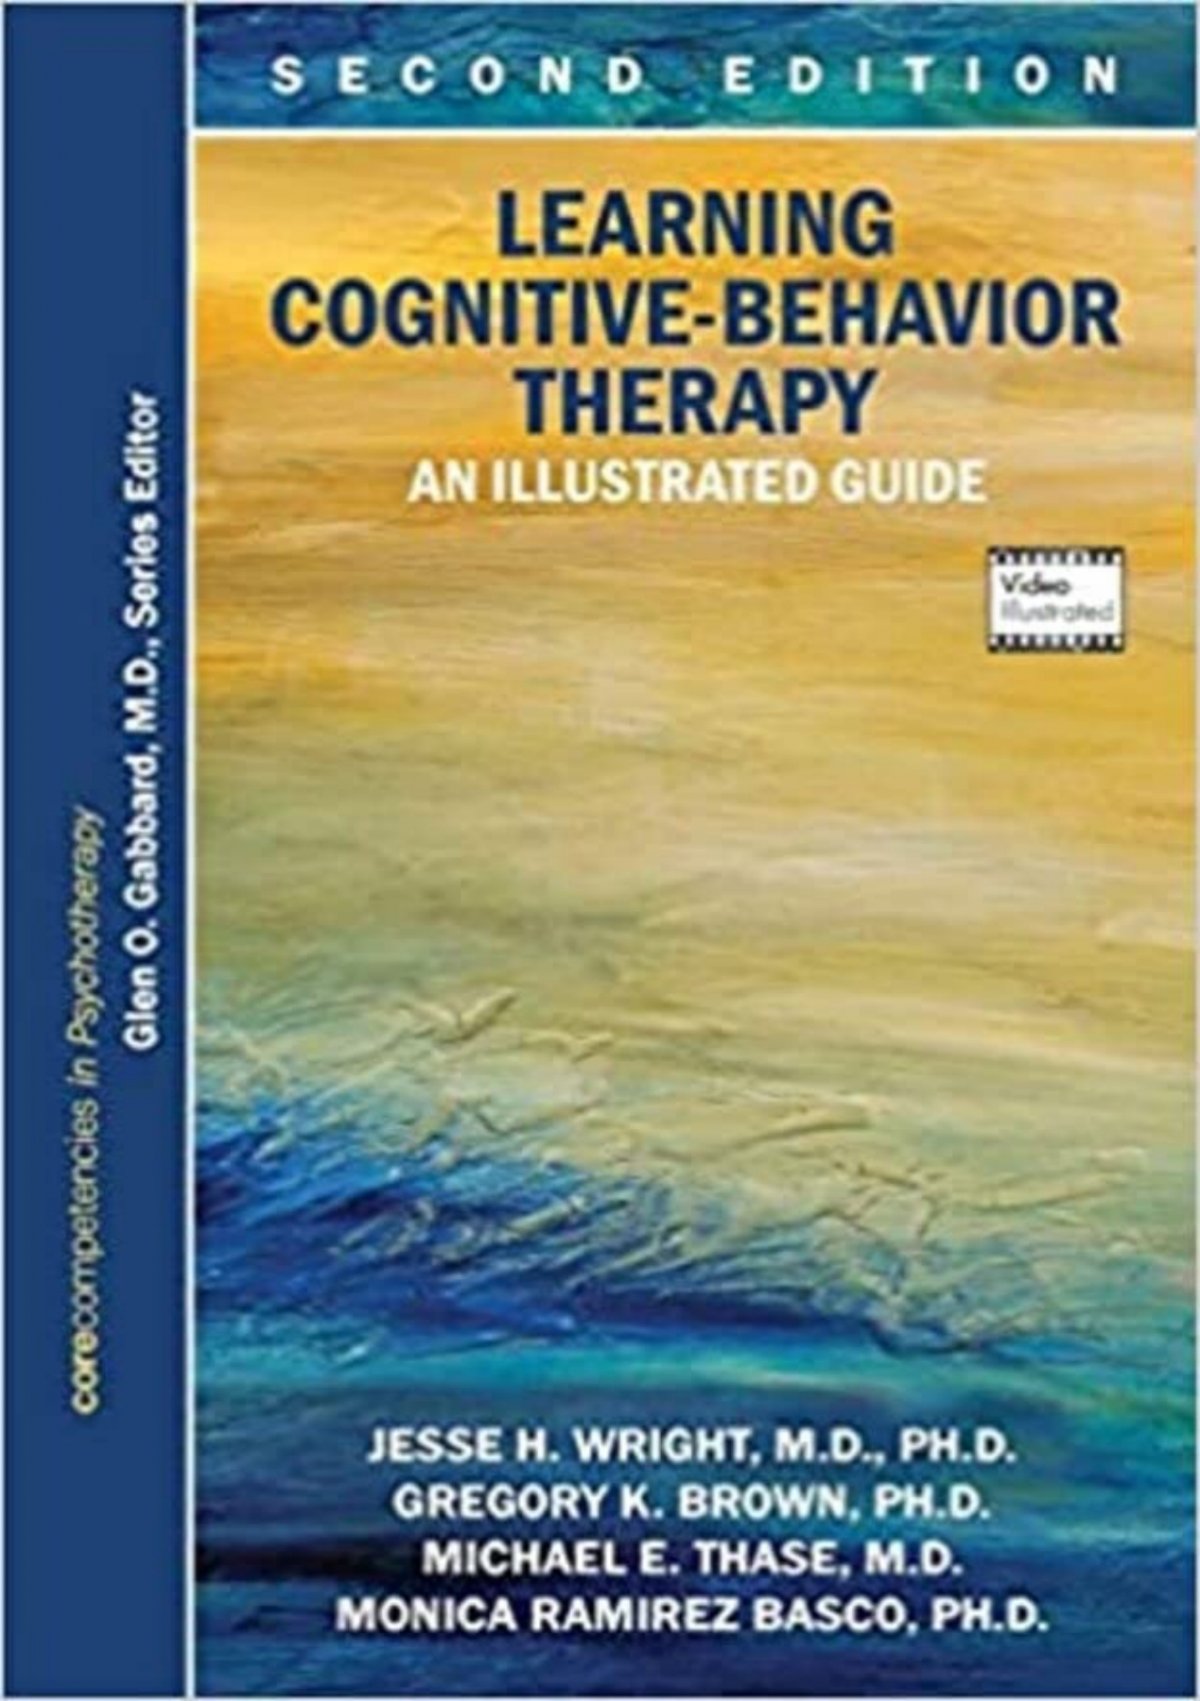 learning cognitive-behavior therapy an illustrated guide pdf download